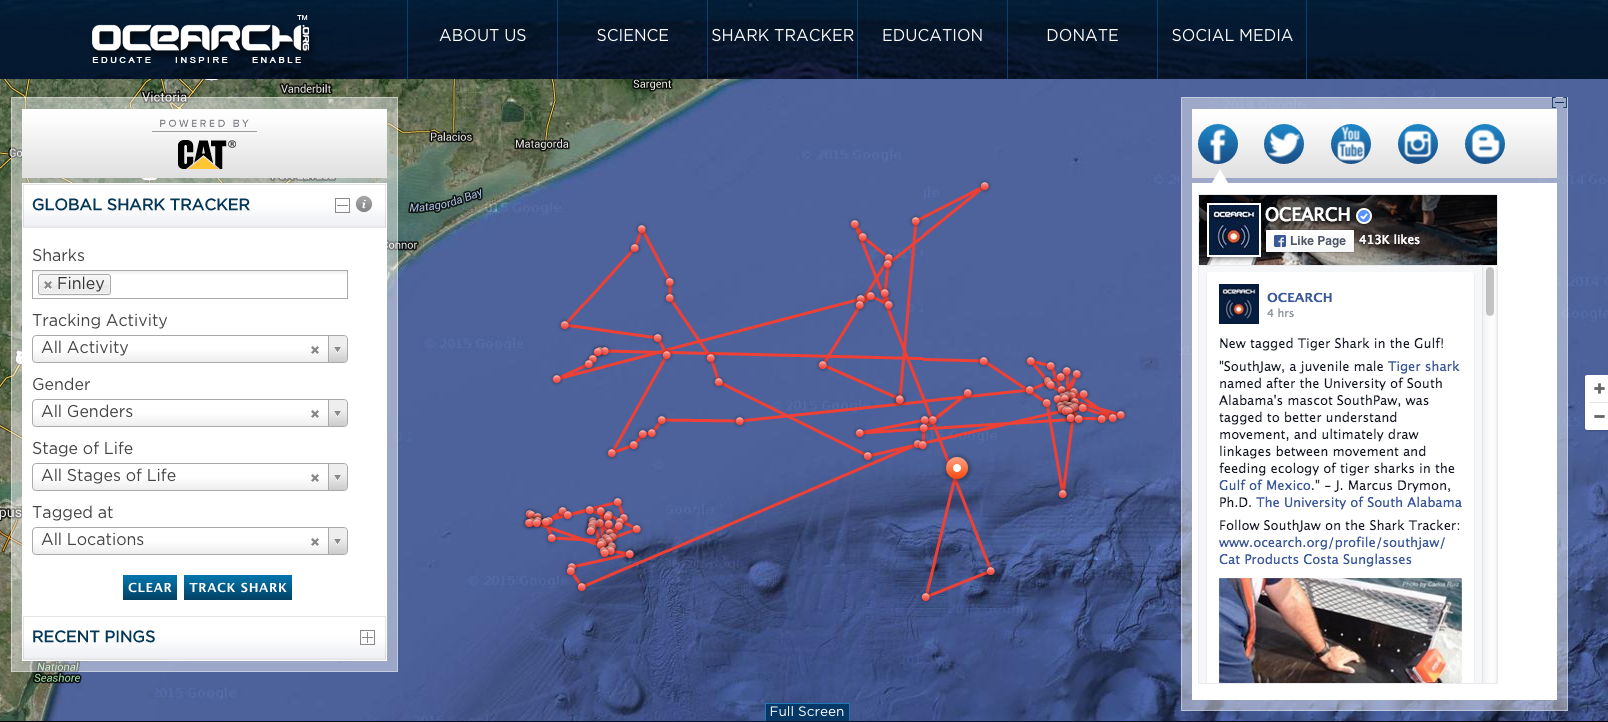 At Ocearch, you are able to track great white sharks that have been tagged and released. Follow sharks as they move around the globe with 24-hour updates. You can even click on the shark you are tracking to get their stats, photos and information.  <a href="http://www.ocearch.org/">Here</a>